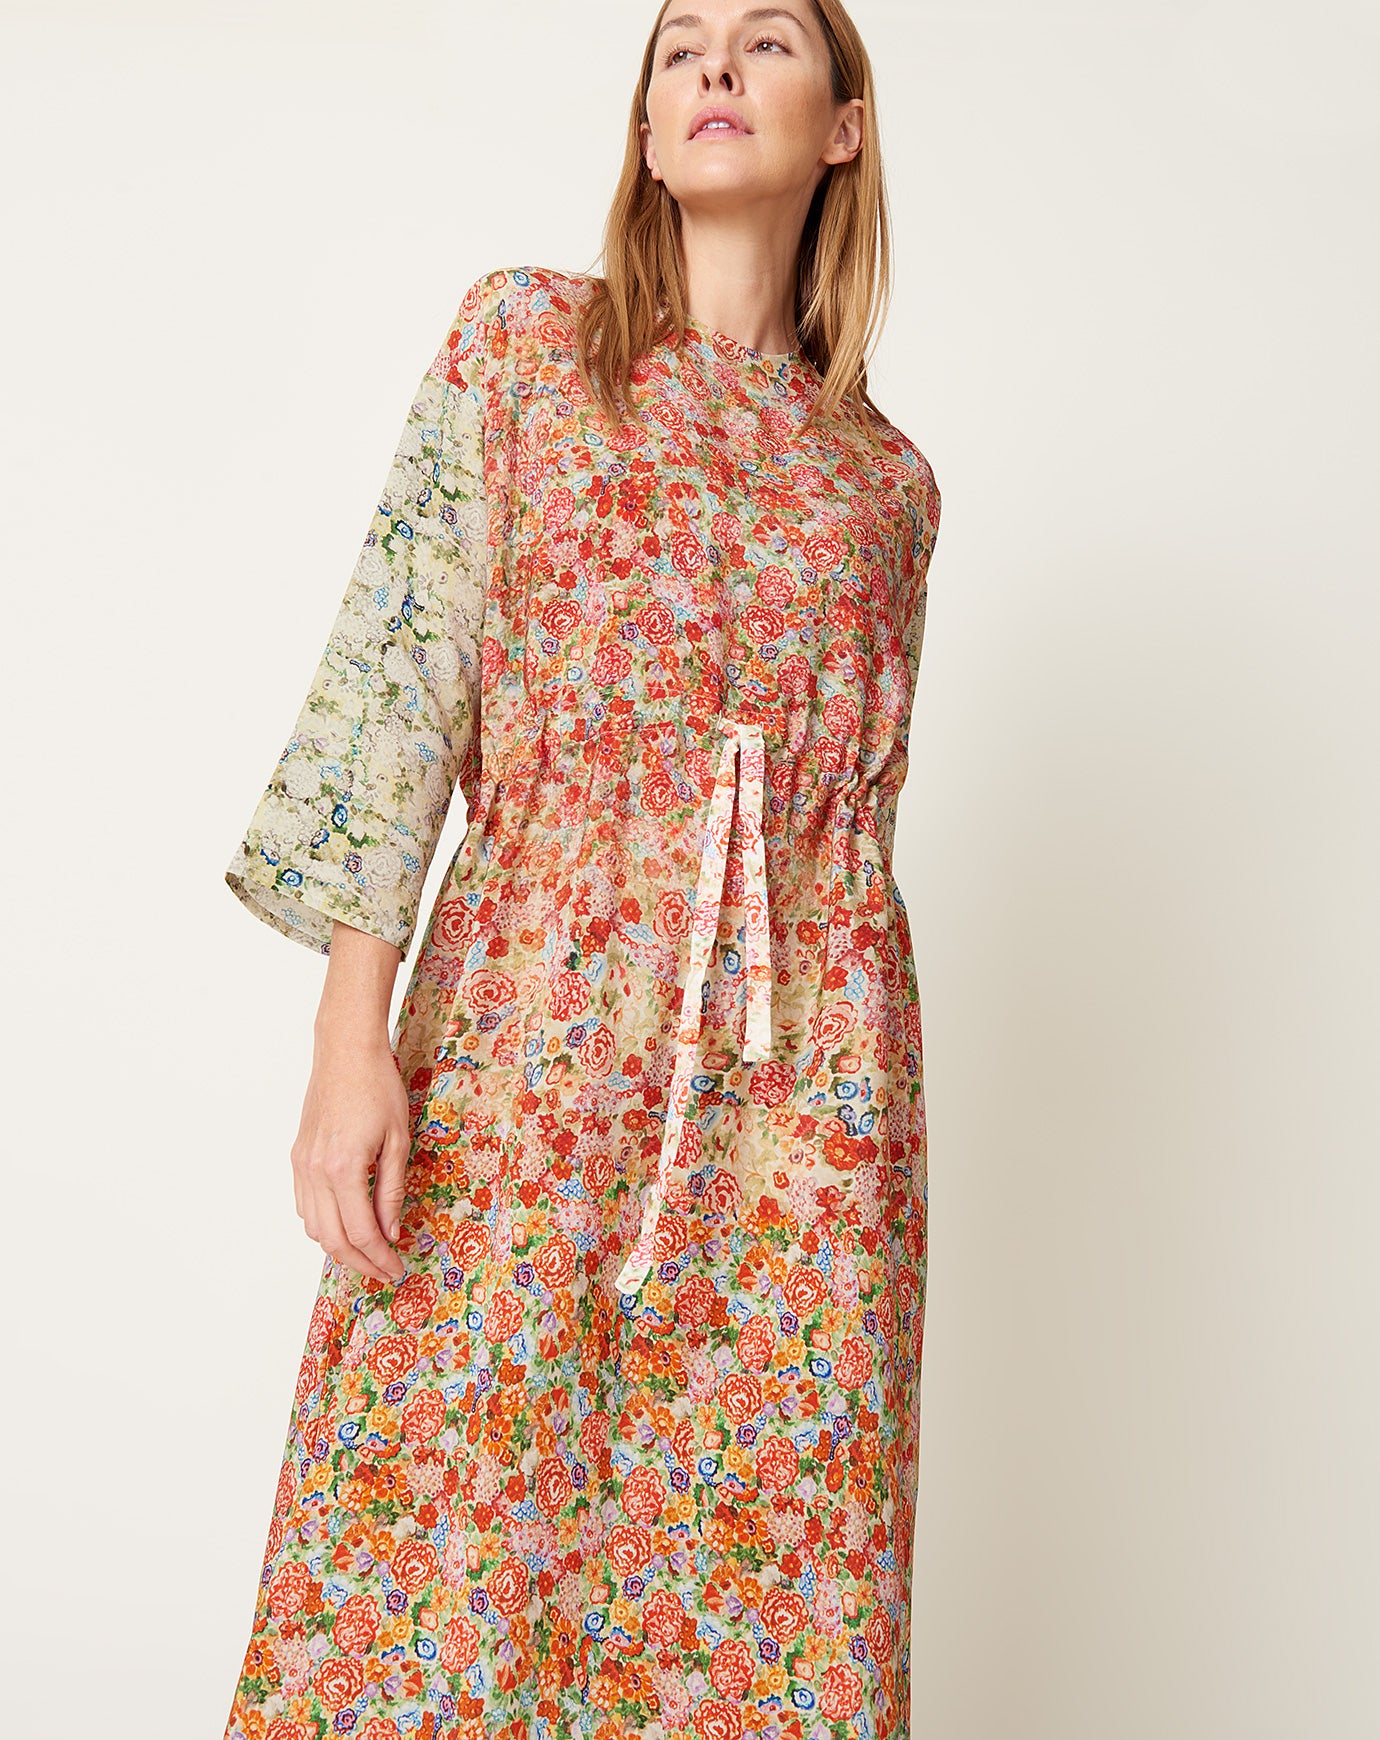 Anntian Simple Dress in Bright Flowers